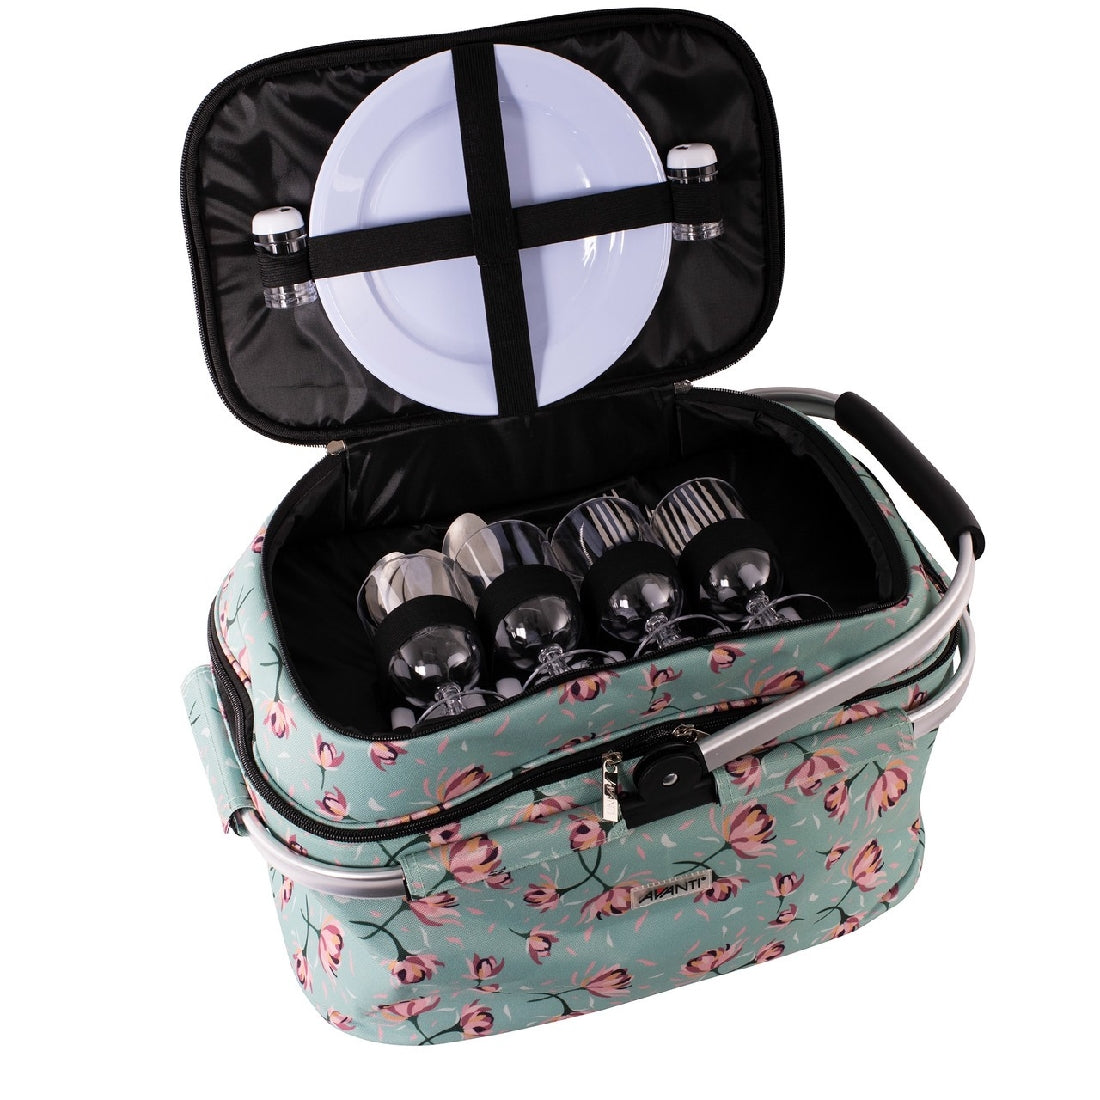 Avanti 4 Person Insulated Cooler Picnic Basket - Posey